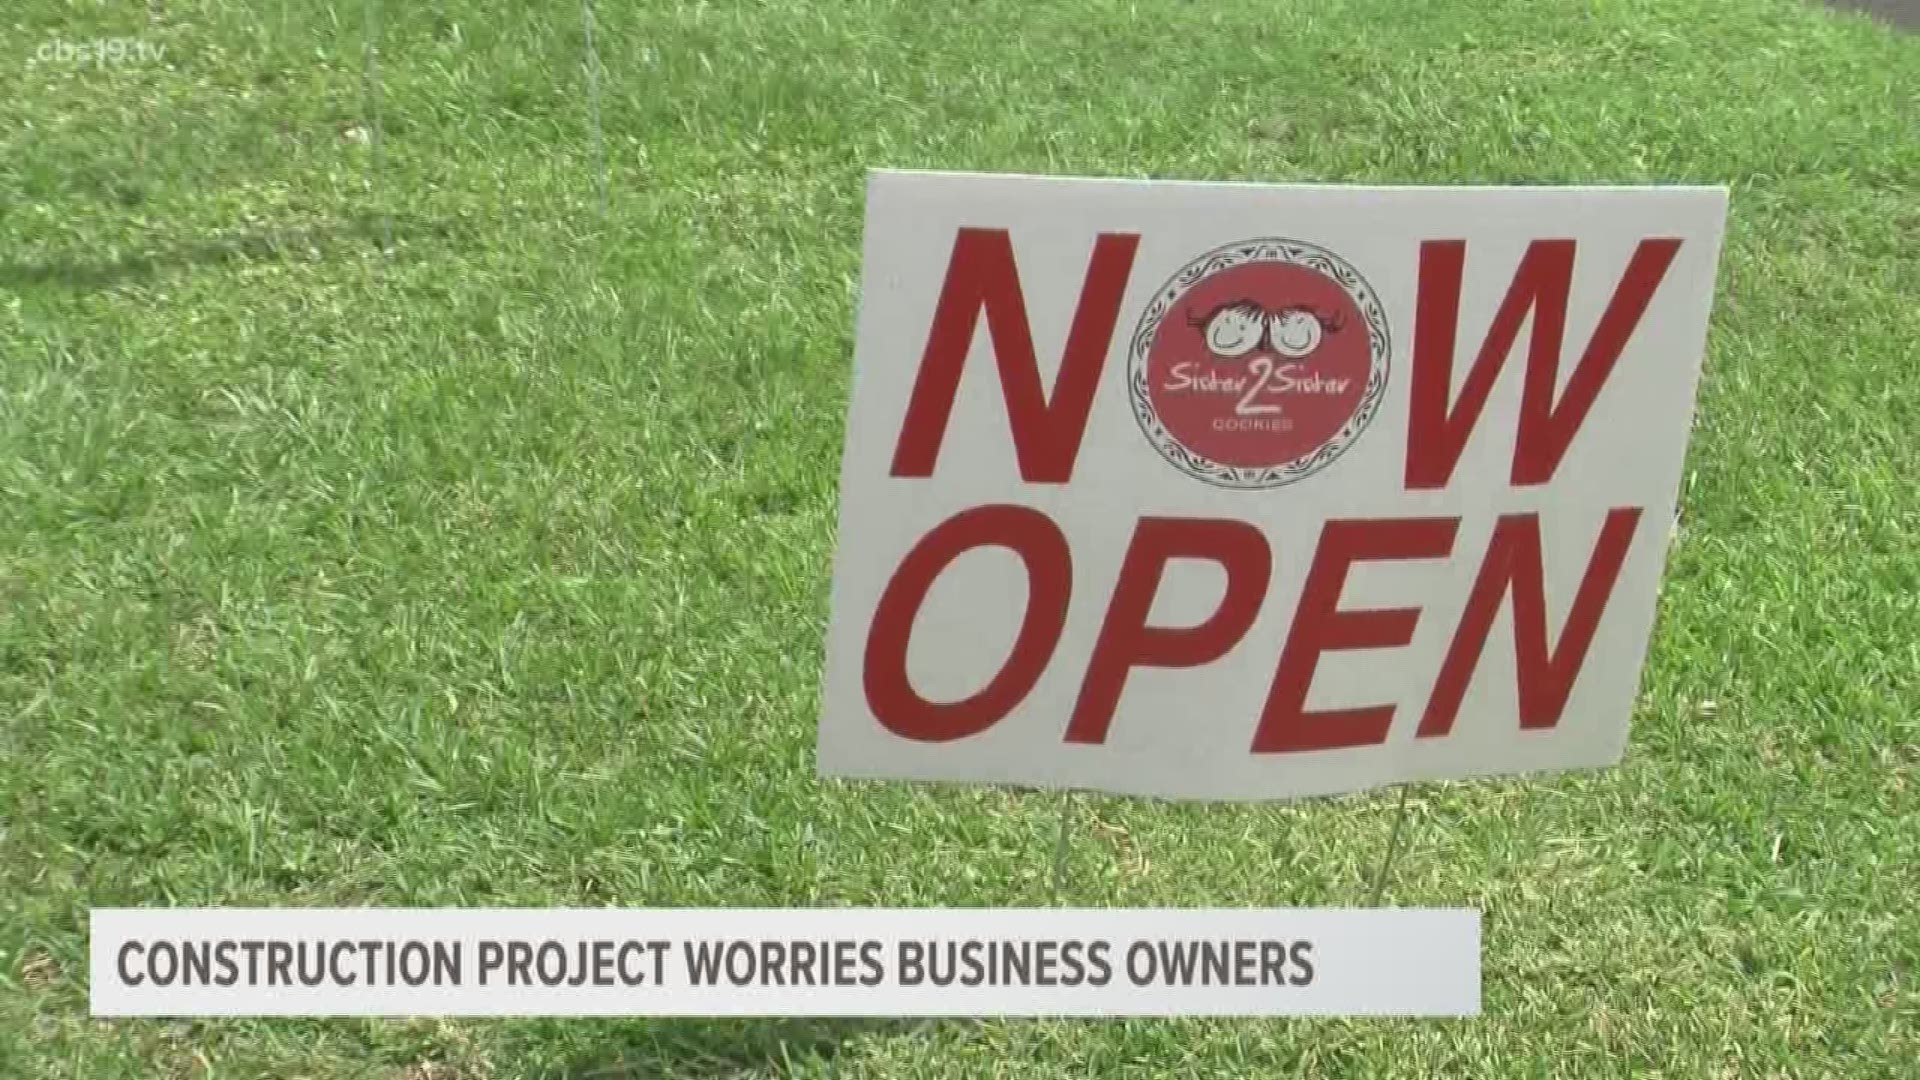 Some business owners are worried that when construction begins along South Broadway in the future, it can potentially have a negative impact on their business. 